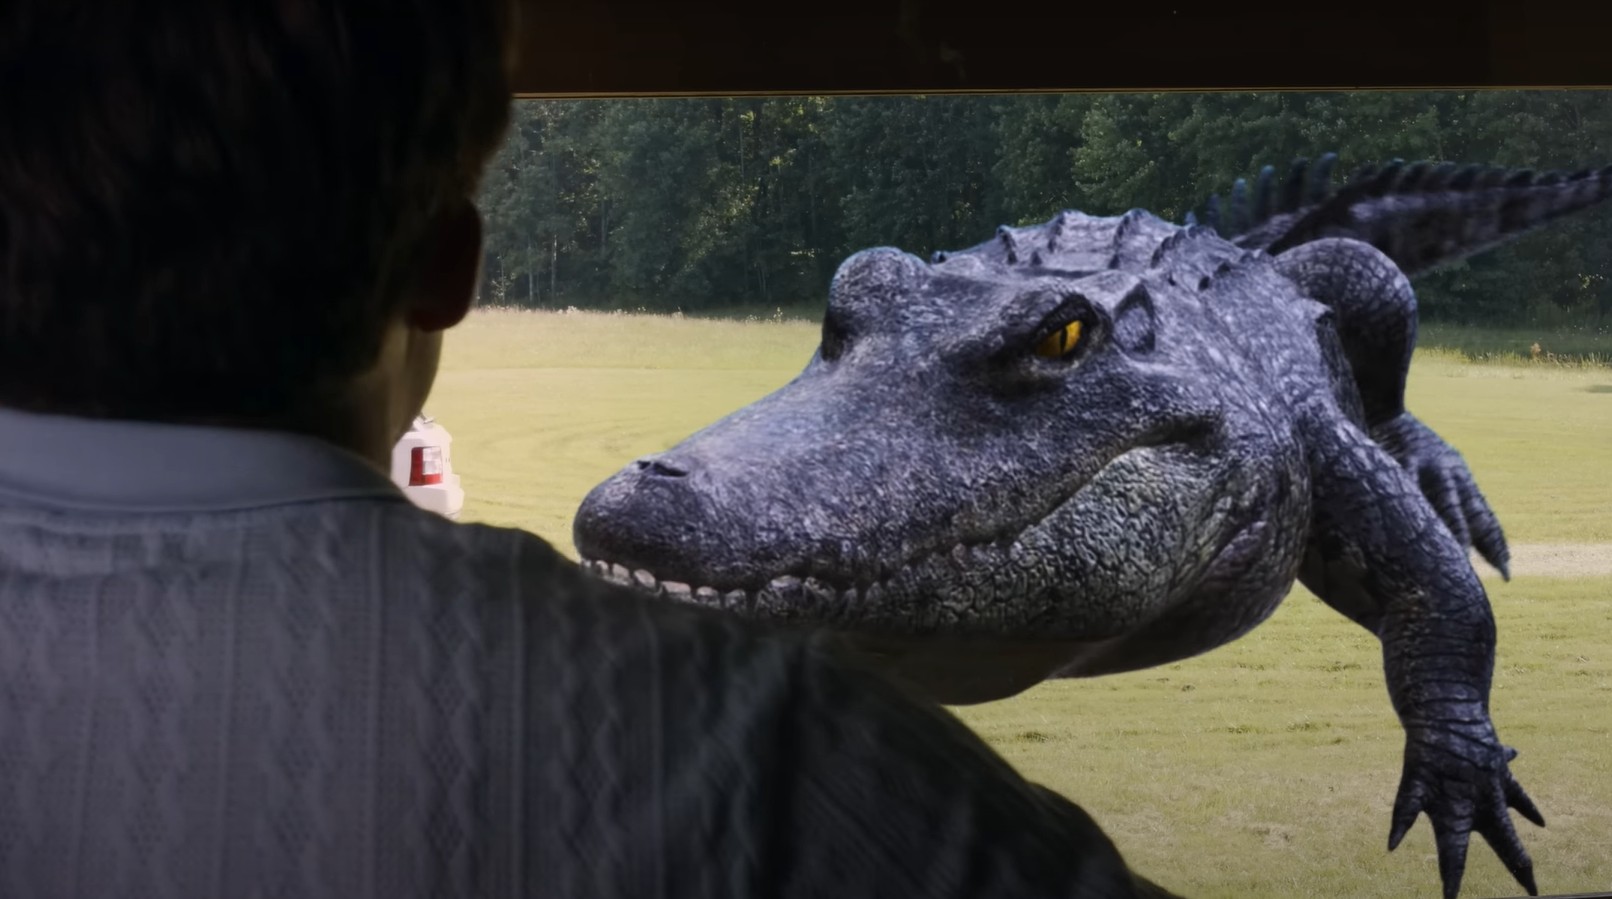 Bad CGI Gator Trailer Delivers on Its Title